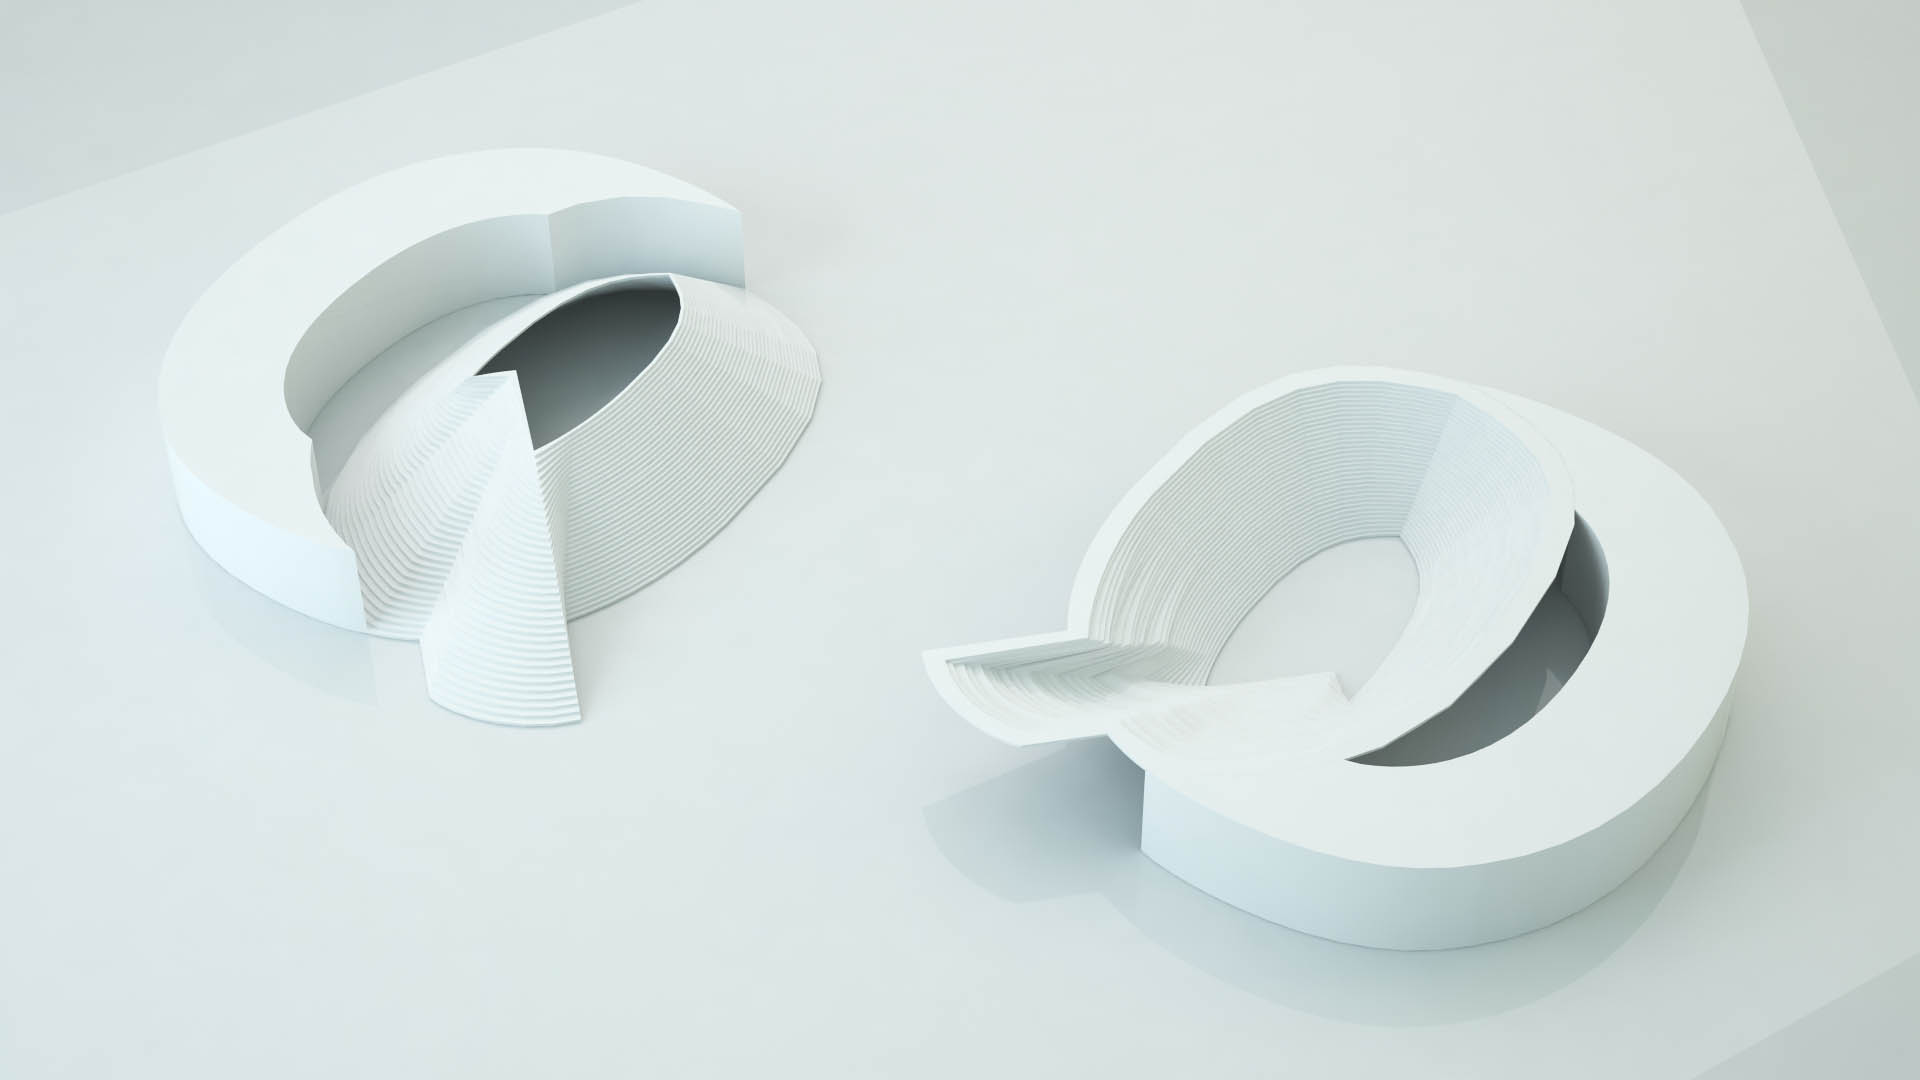 Duality experimental typeface 3D printing